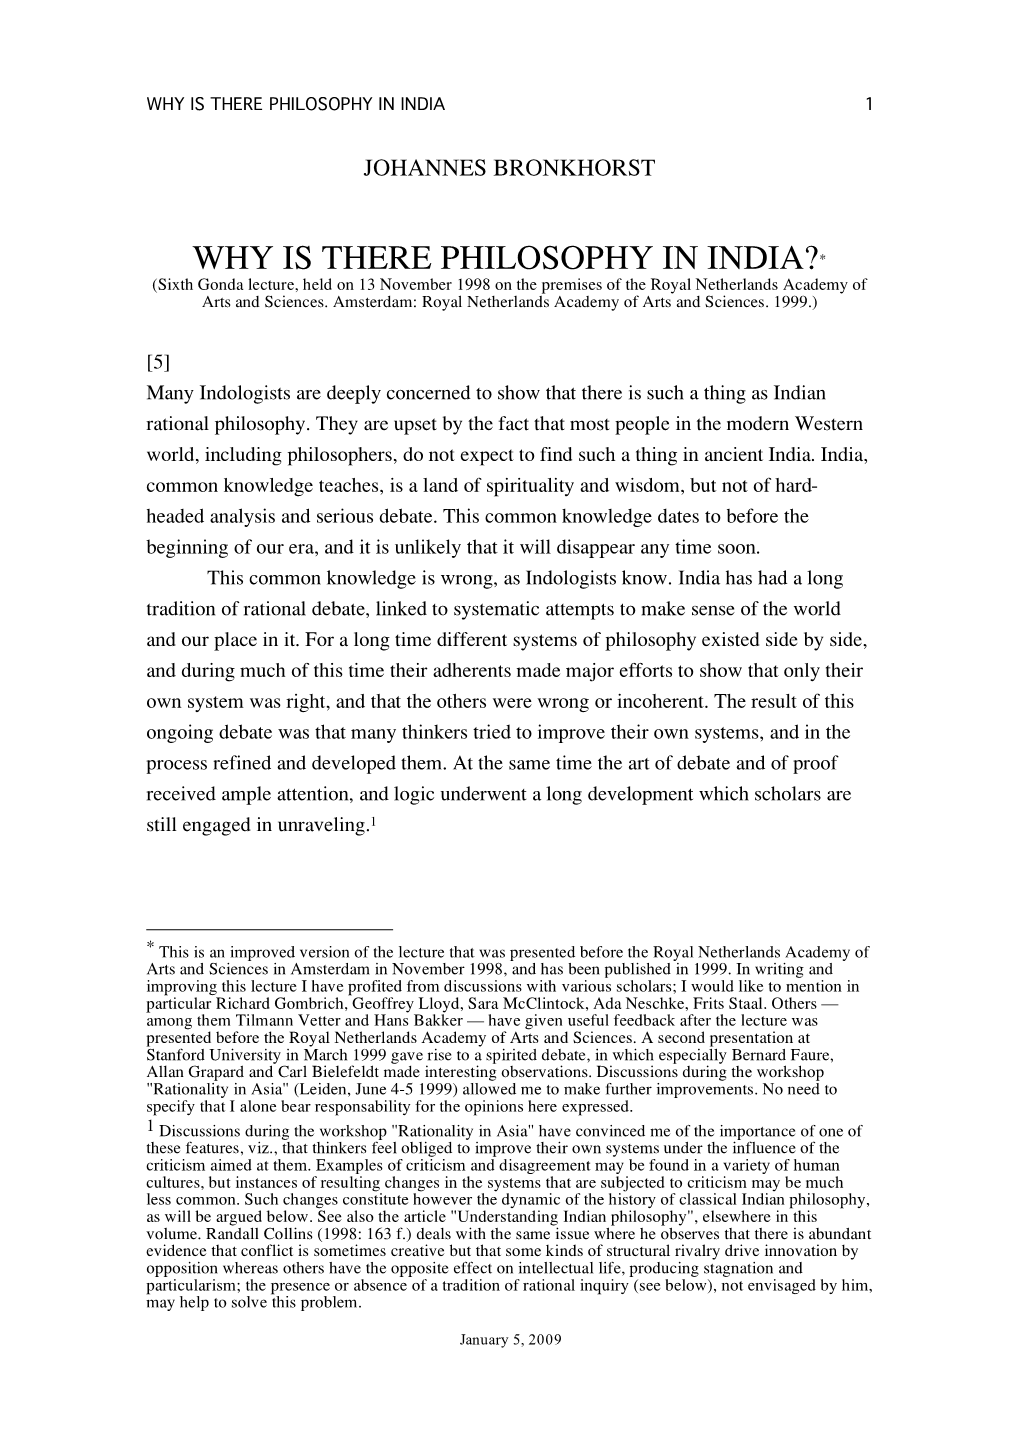 WHY IS THERE PHILOSOPHY in INDIA?* (Sixth Gonda Lecture, Held on 13 November 1998 on the Premises of the Royal Netherlands Academy of Arts and Sciences